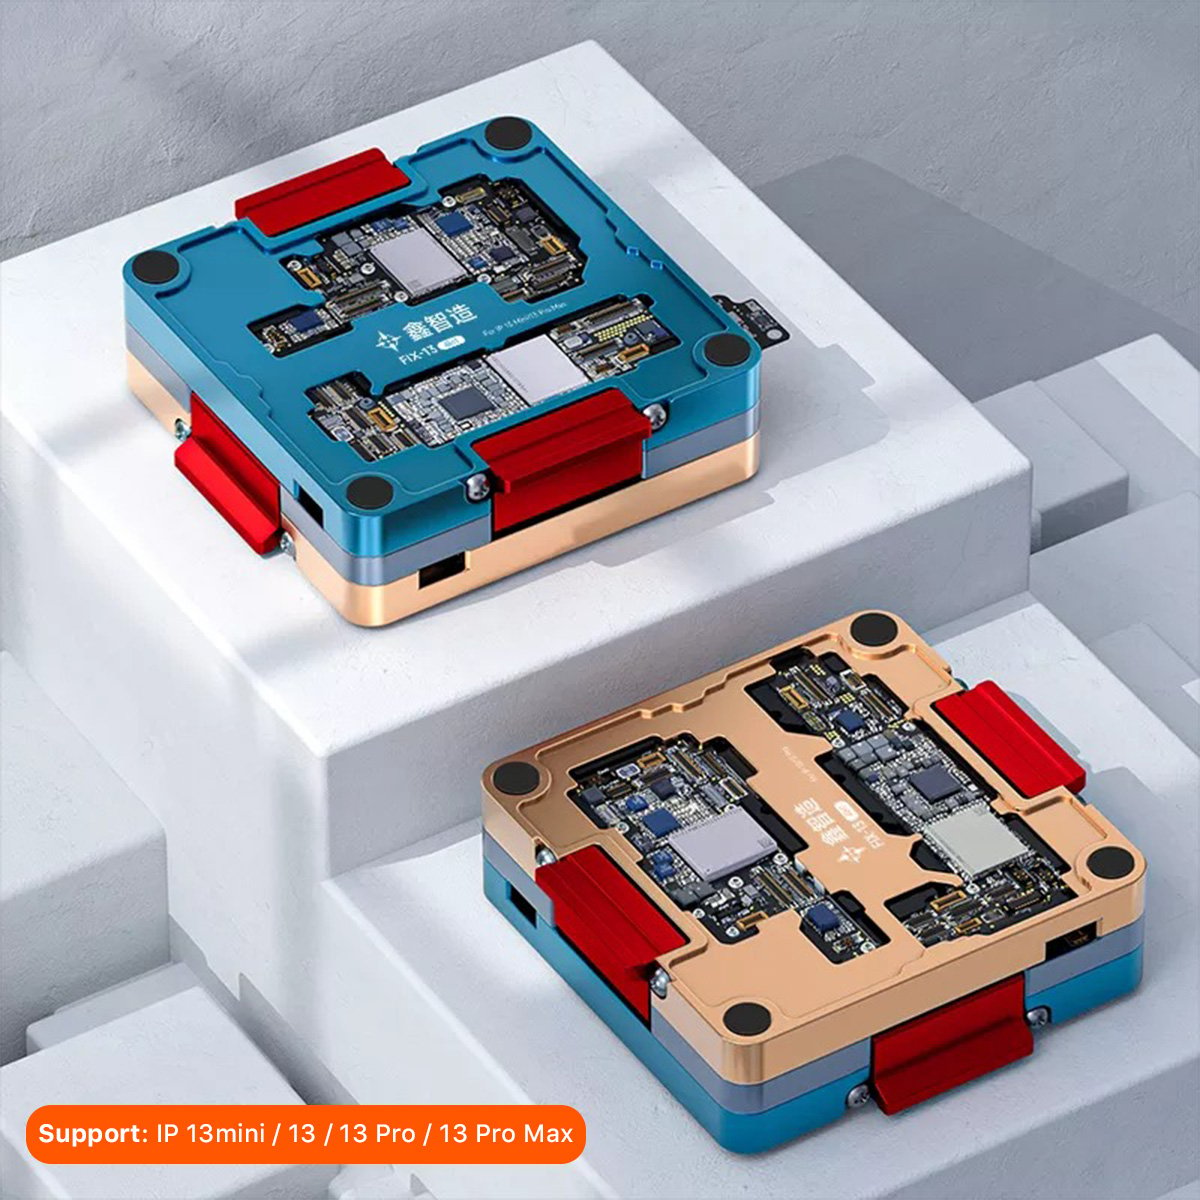 Xinzhizao FIX-13 - 4 in 1 Double Sided Motherboard Layer Test Fixture  - For iPhone 13 / 13 Mini / 13 Pro / 13 Pro Max